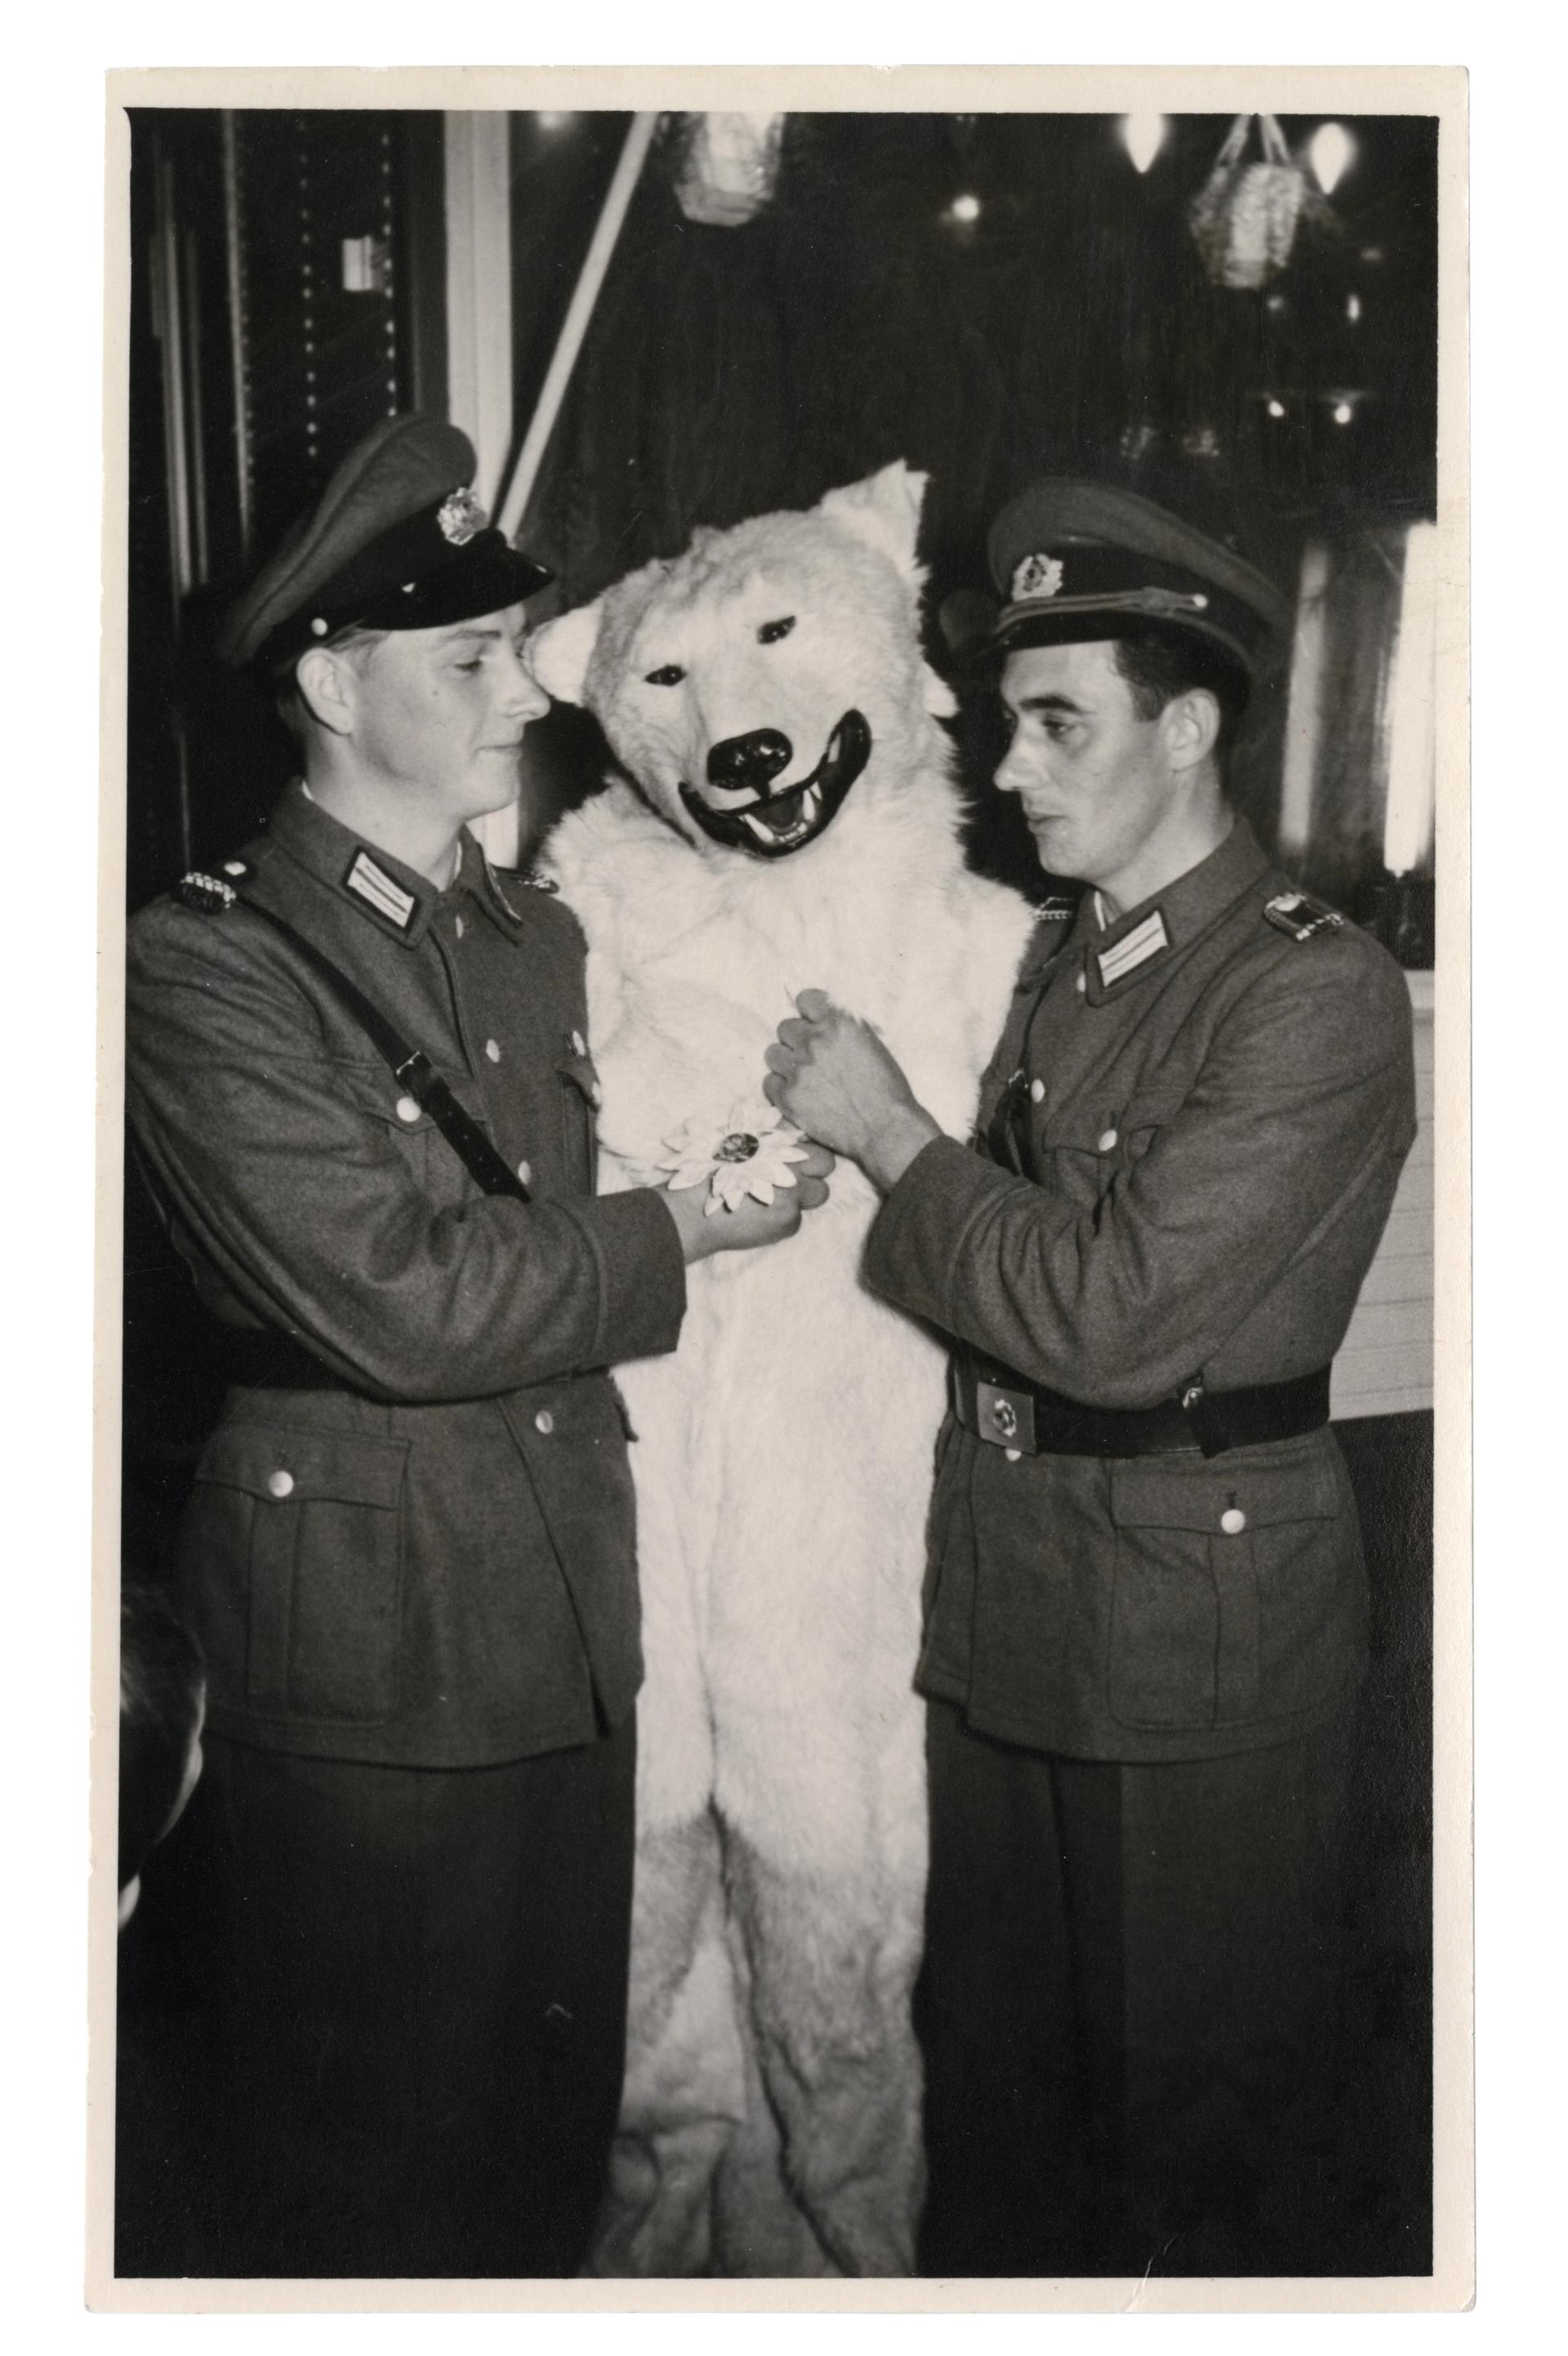 A smiling polar bear sandwiched between two German soldiers in Wehrmacht uniforms.